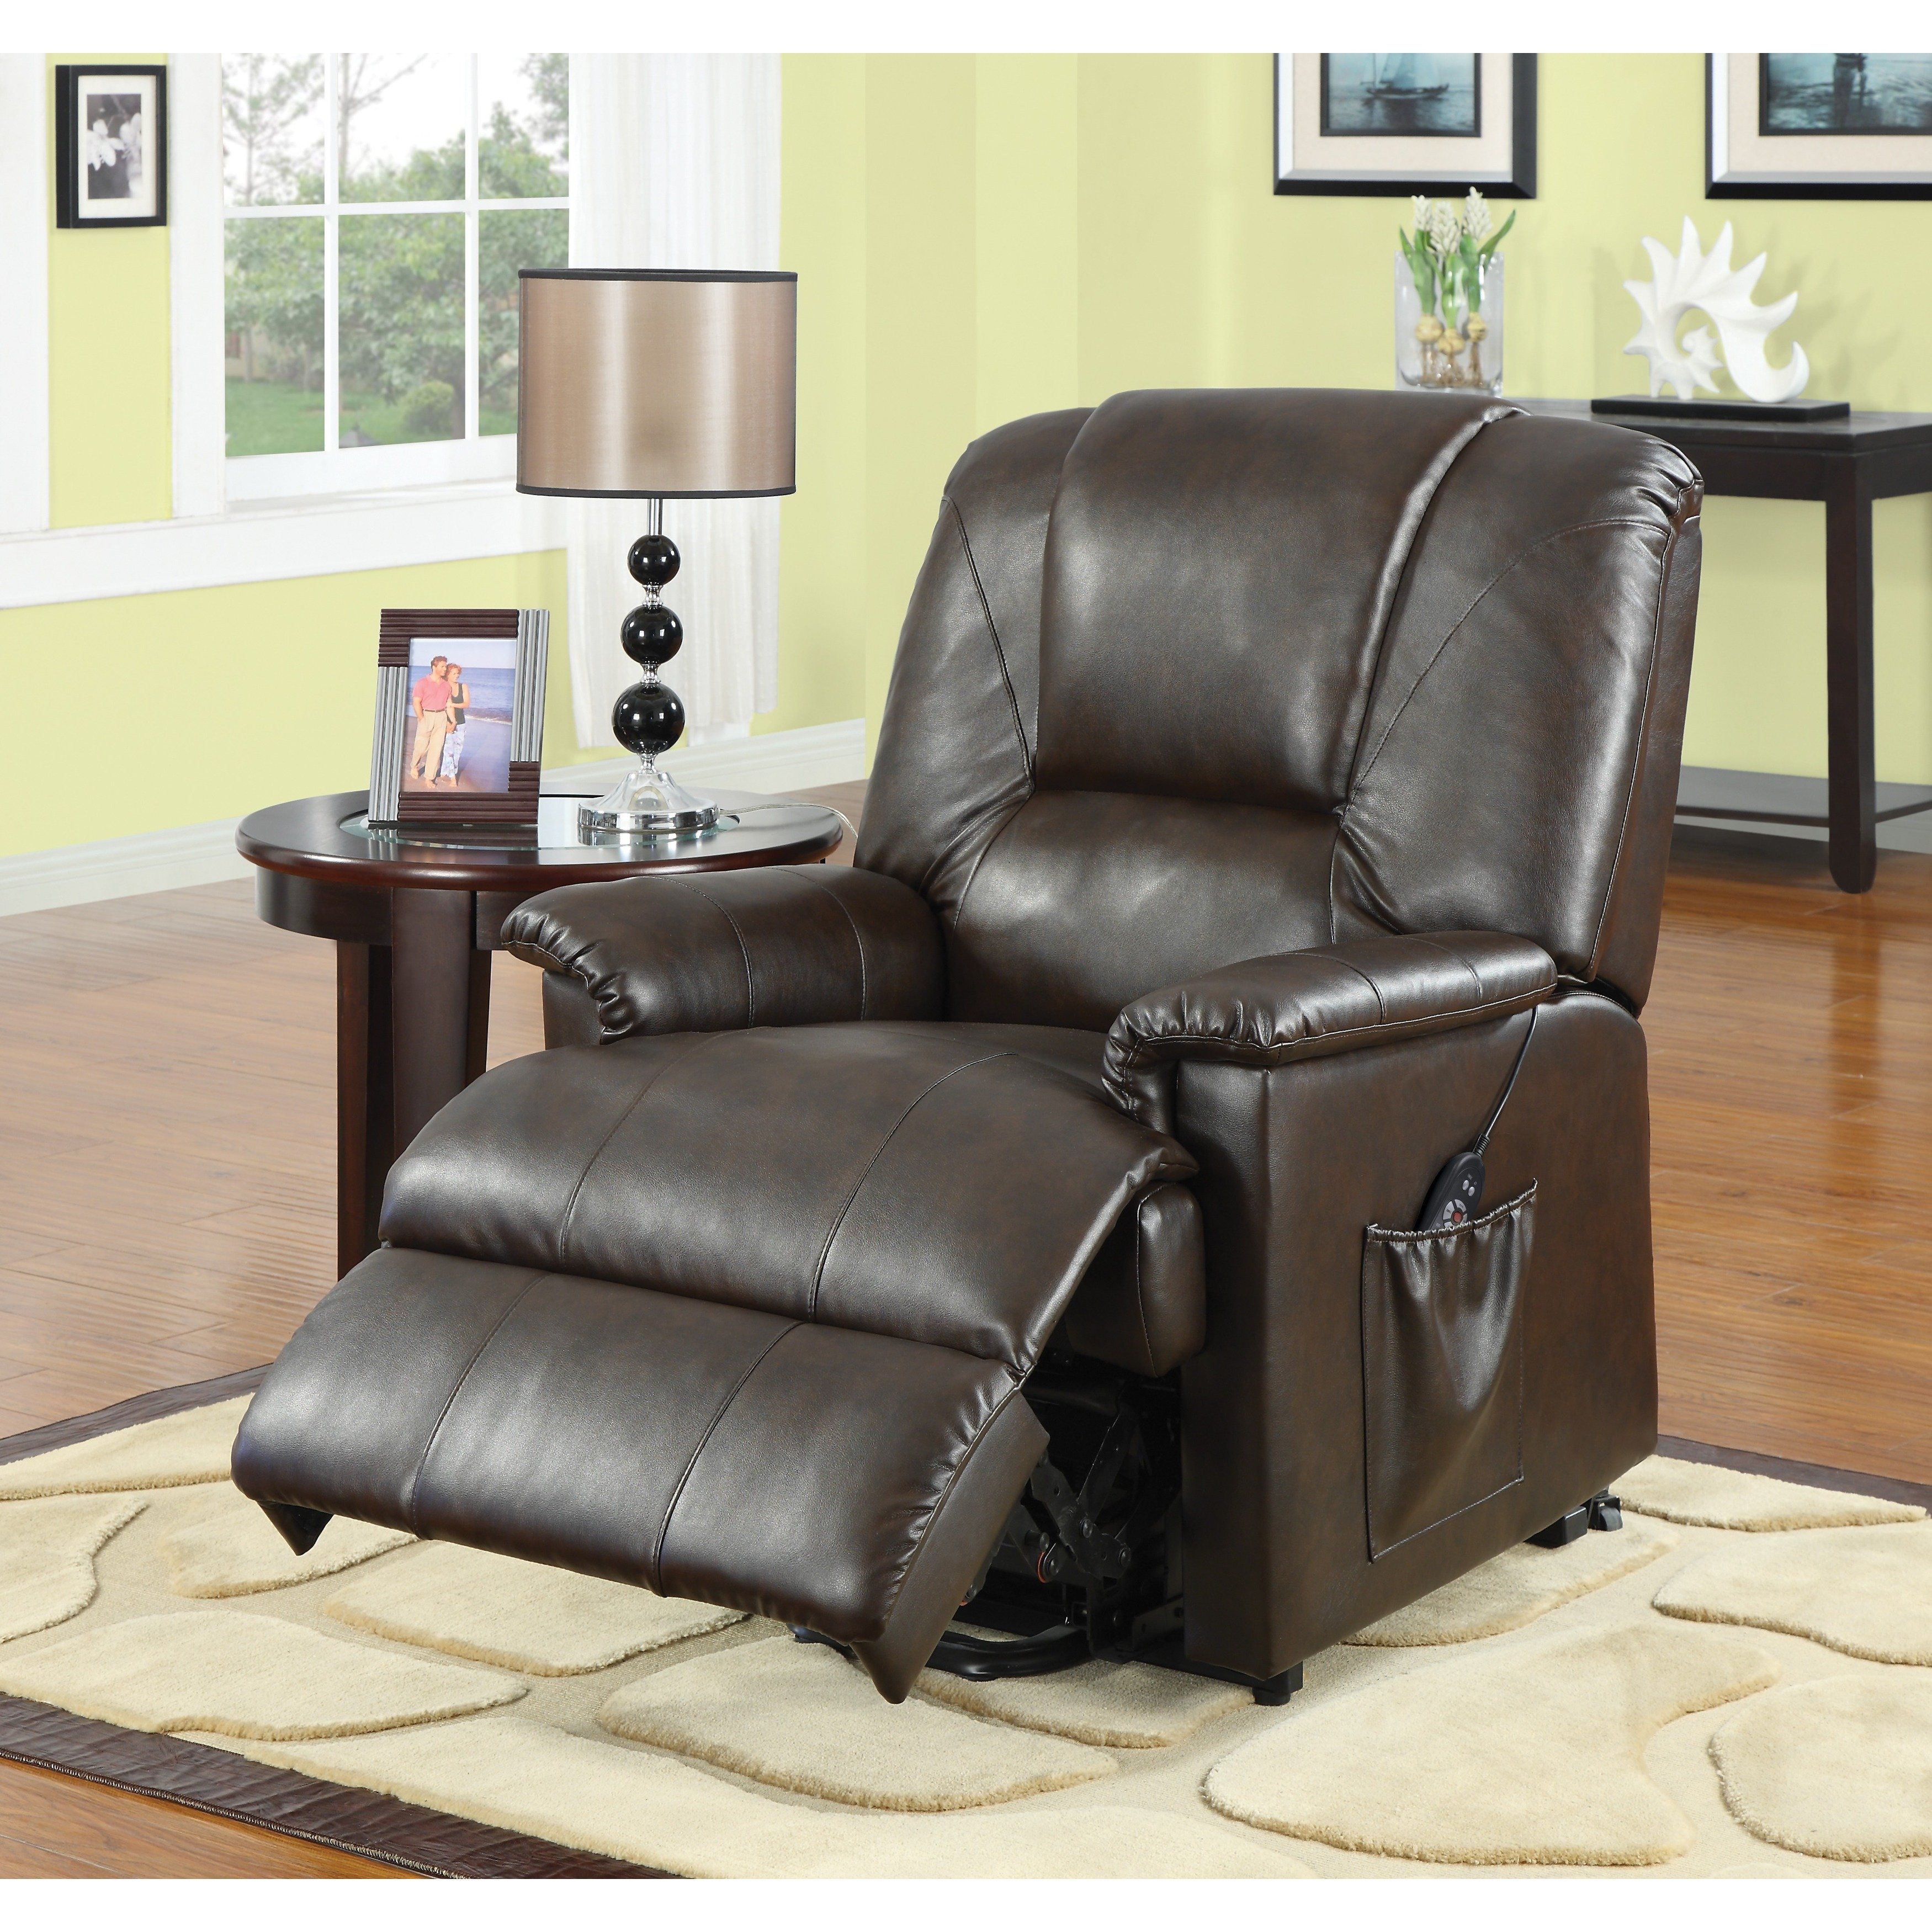 24 Ideal Hardwood Floor Protector Recliner 2024 free download hardwood floor protector recliner of shop reseda black brown faux leather power lift and massage recliner with shop reseda black brown faux leather power lift and massage recliner free shipp